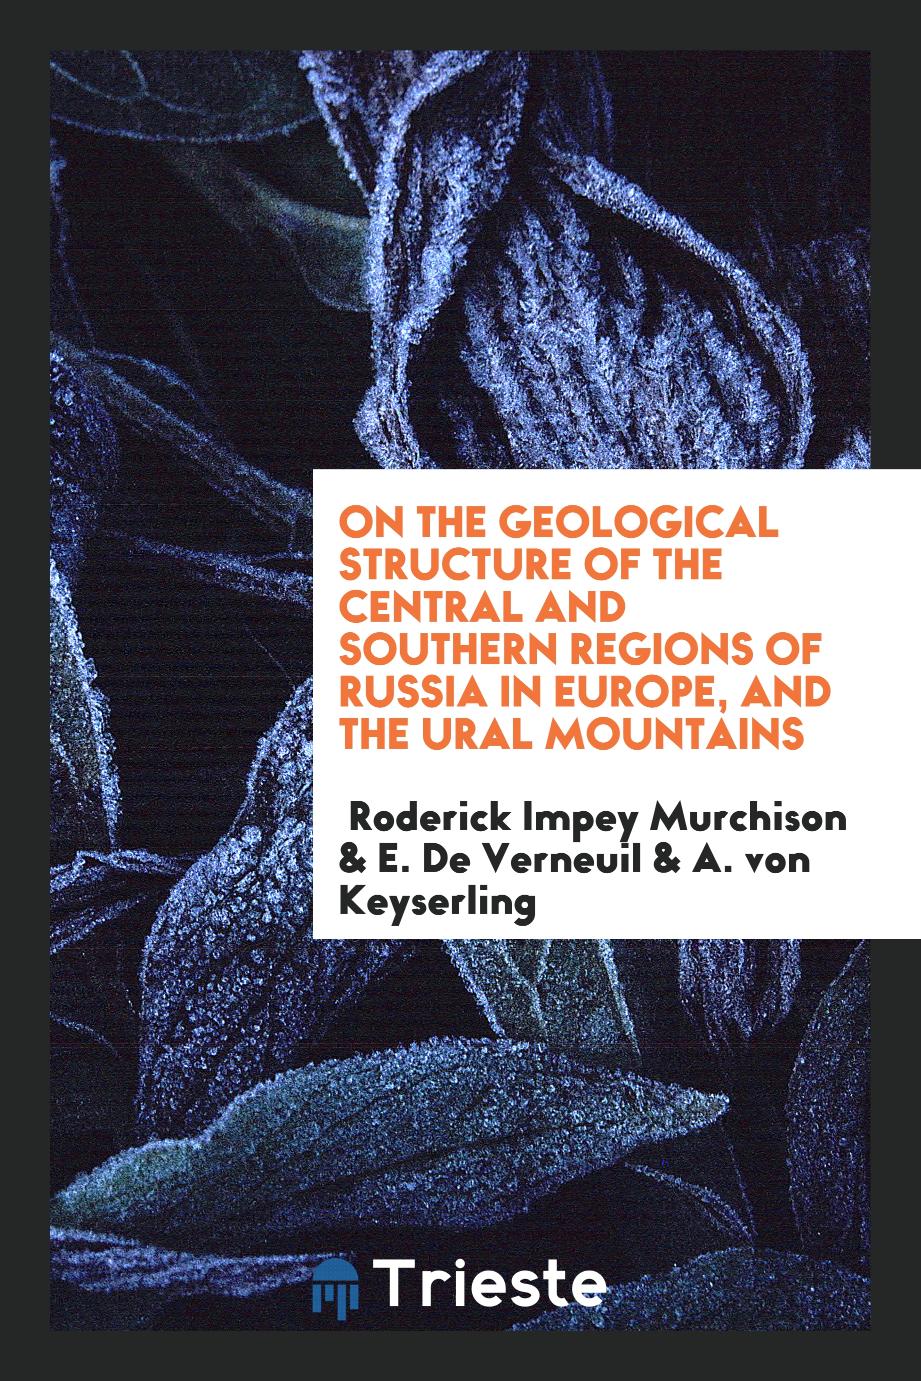 On the Geological Structure of the Central and Southern Regions of Russia in Europe, and the Ural Mountains